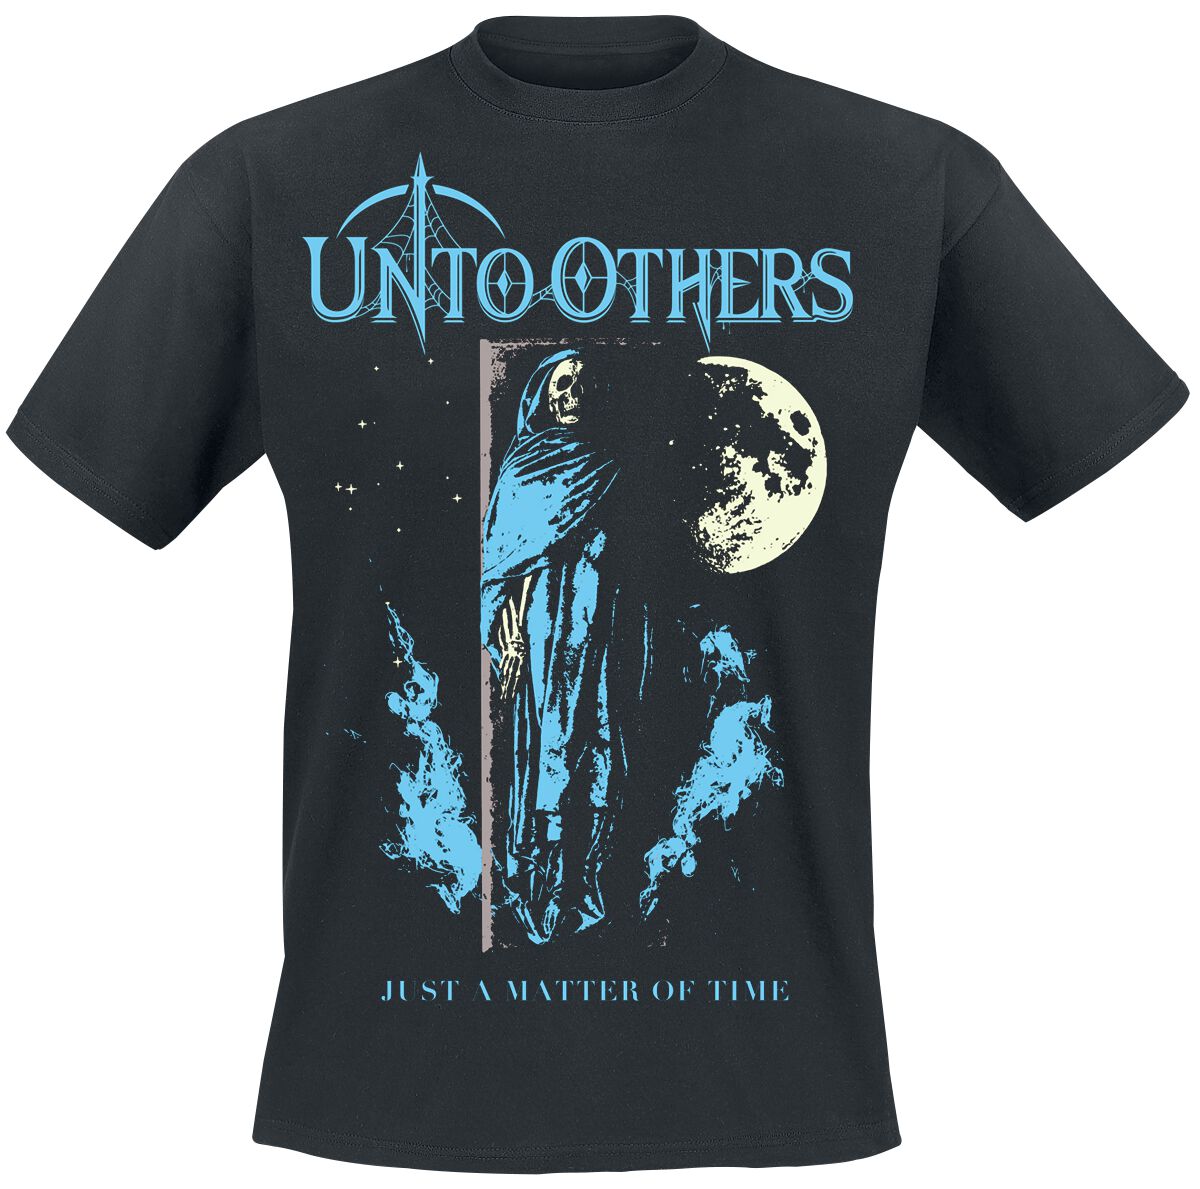 Unto Others Crypt T-Shirt black